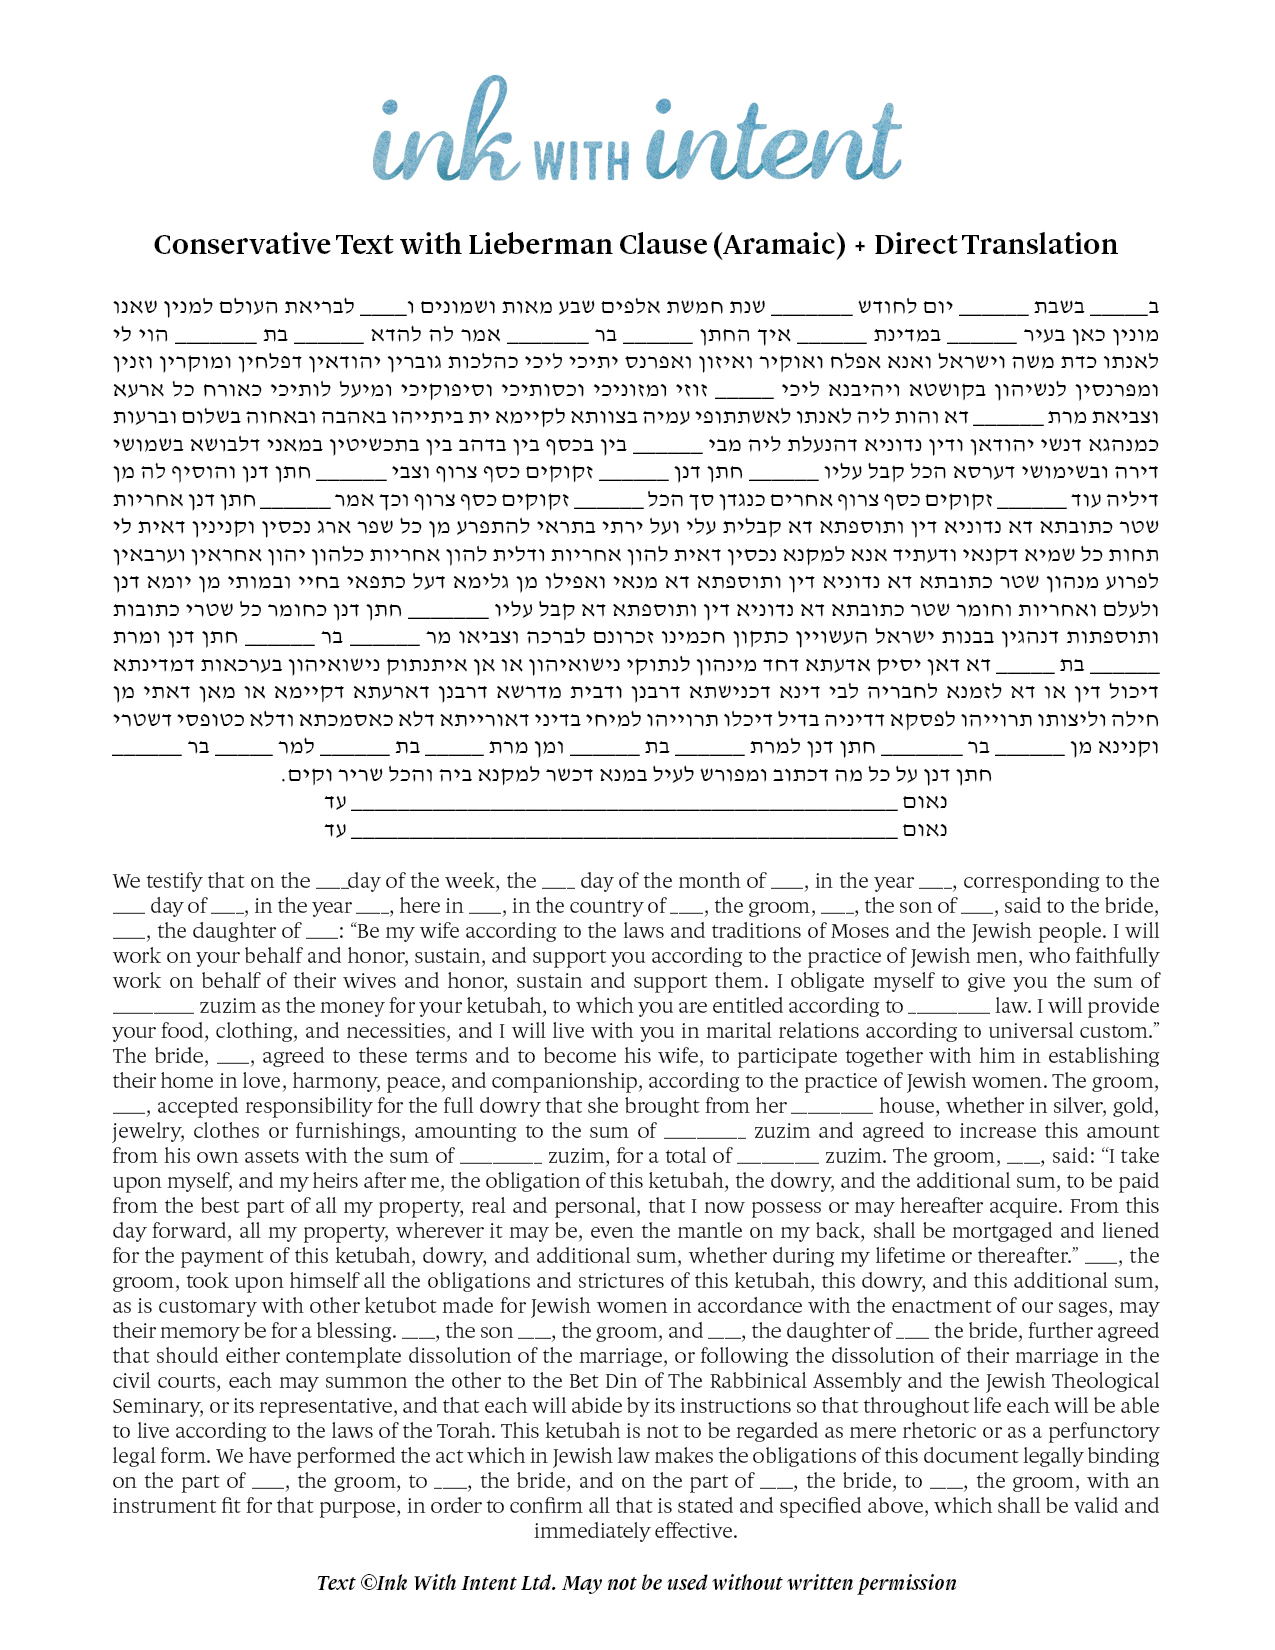 Conservative with Lieberman Clause Ketubah Text + Direct Translation